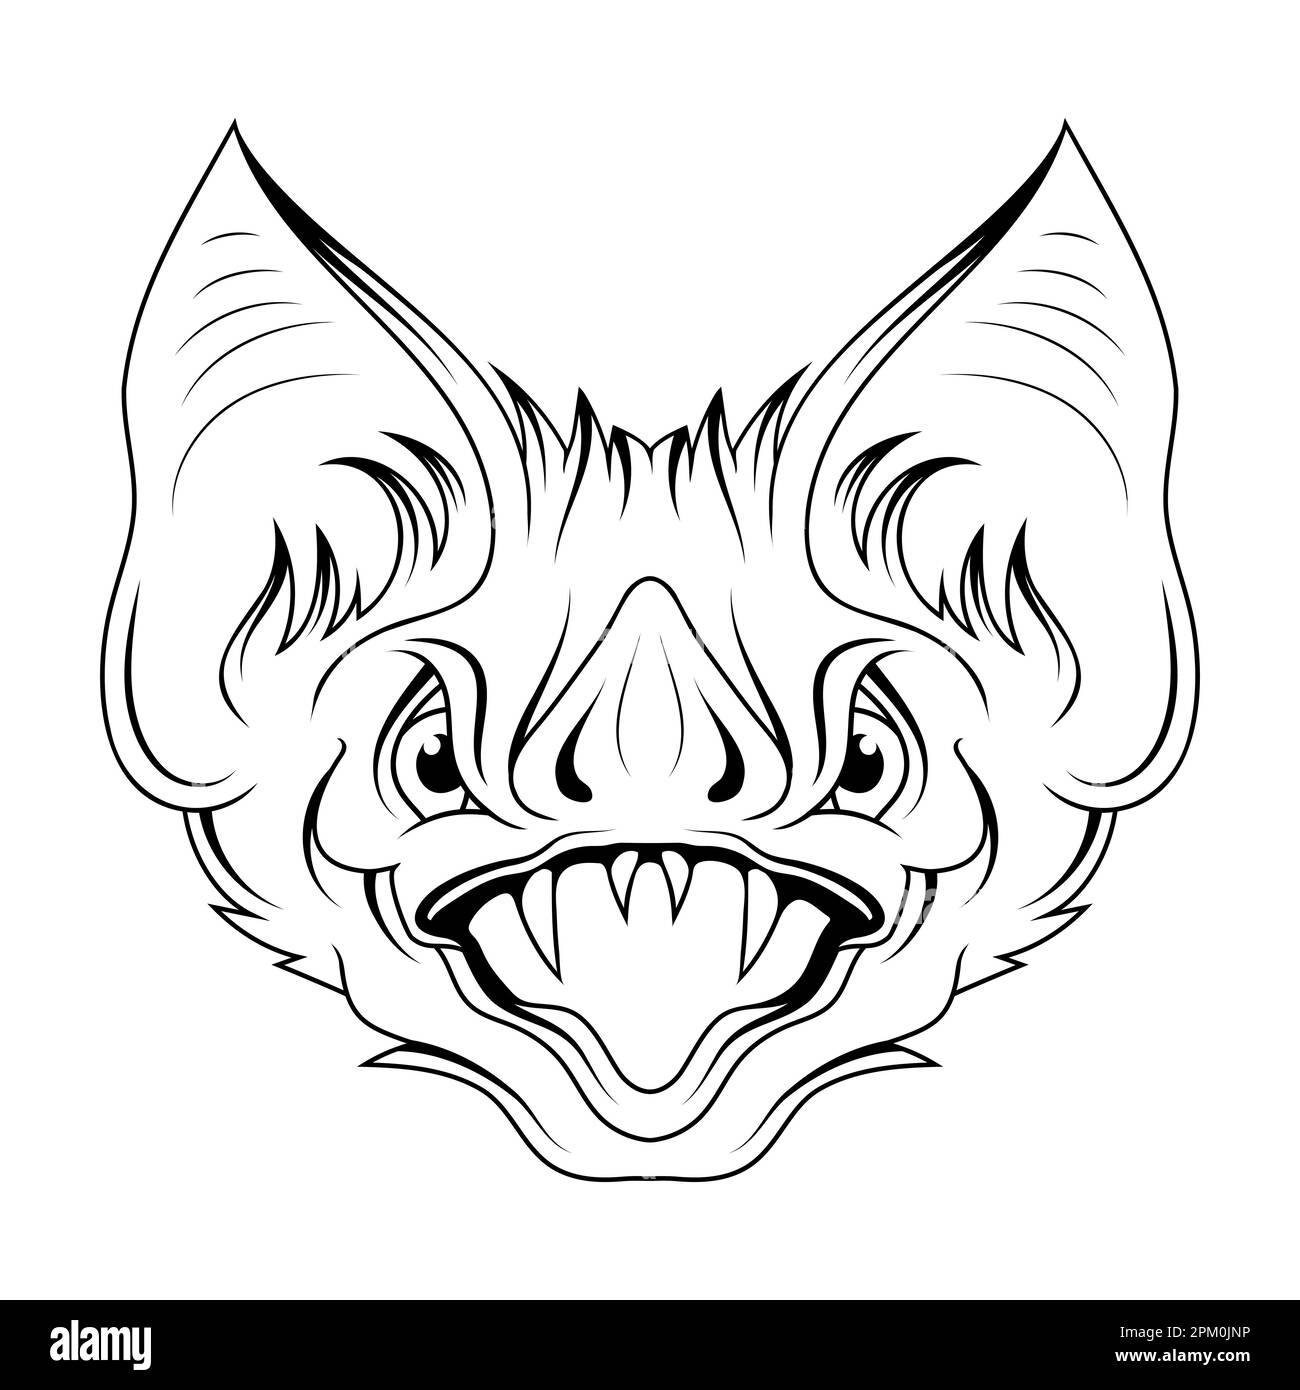 Bat claws Stock Vector Images - Alamy